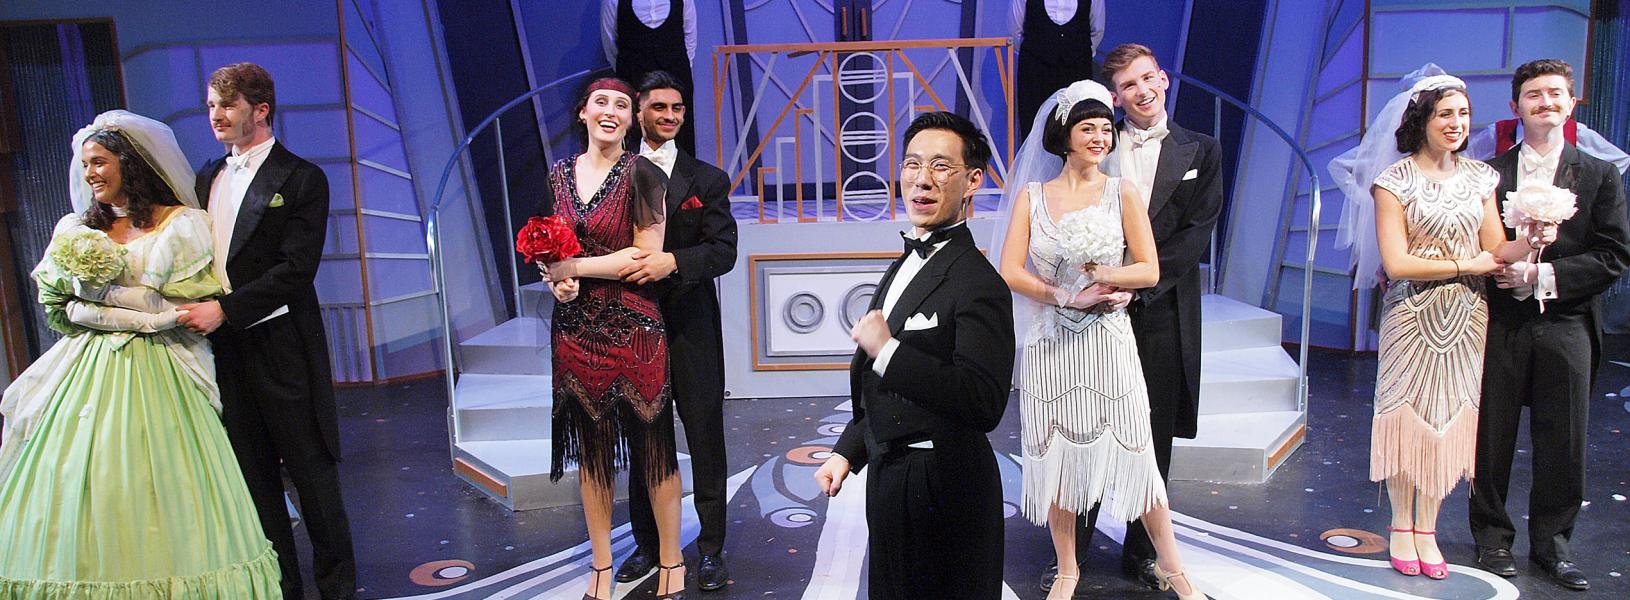 A 2019 Queen's student production of The Drowsy Chaperone. 